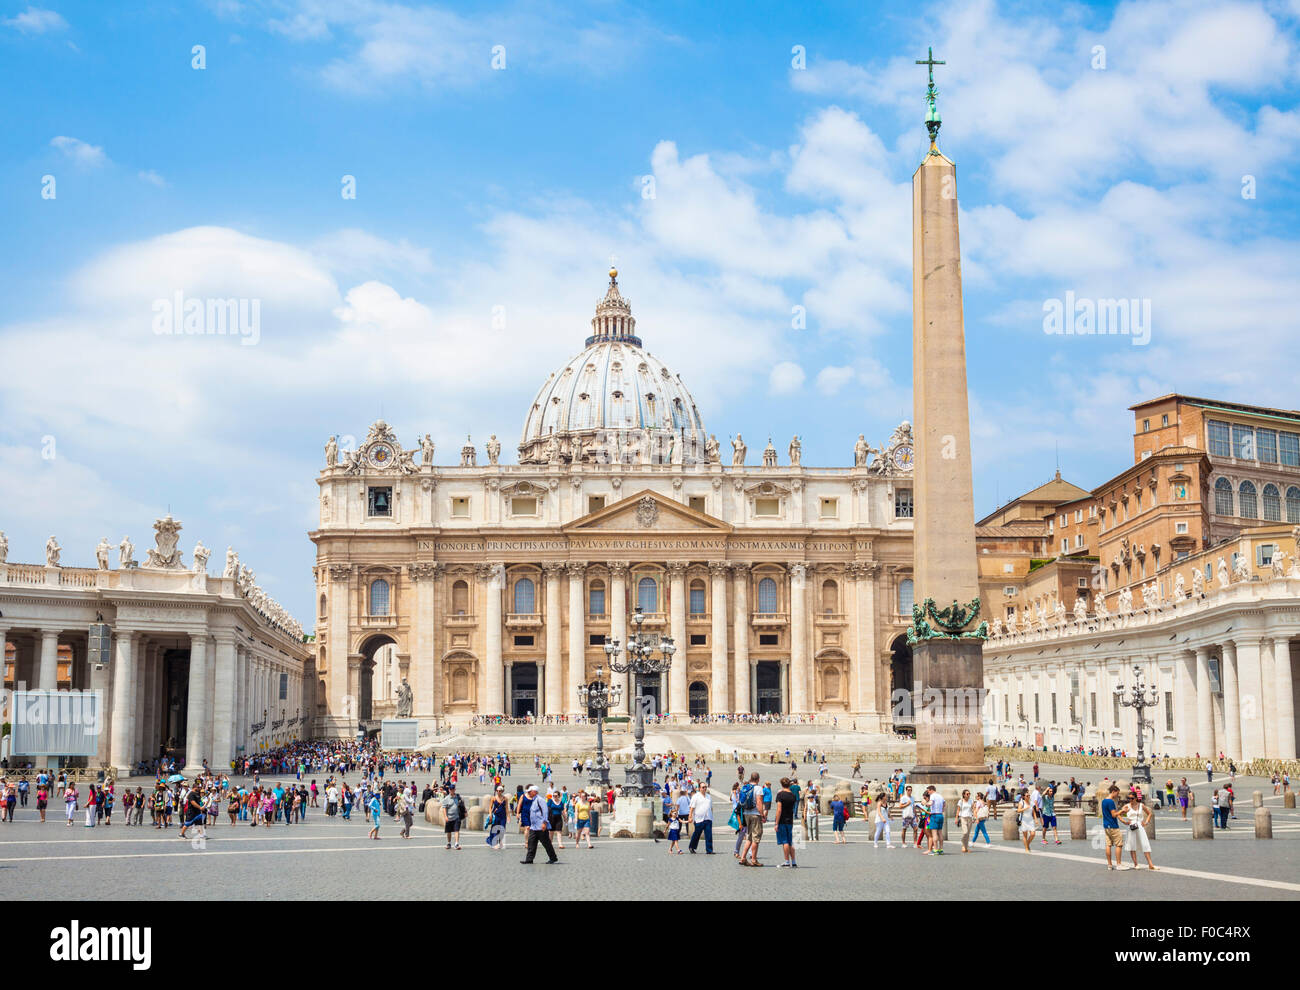 St Peters Square and St Peters Basilica Vatican City Rome Italy EU Europe Stock Photo